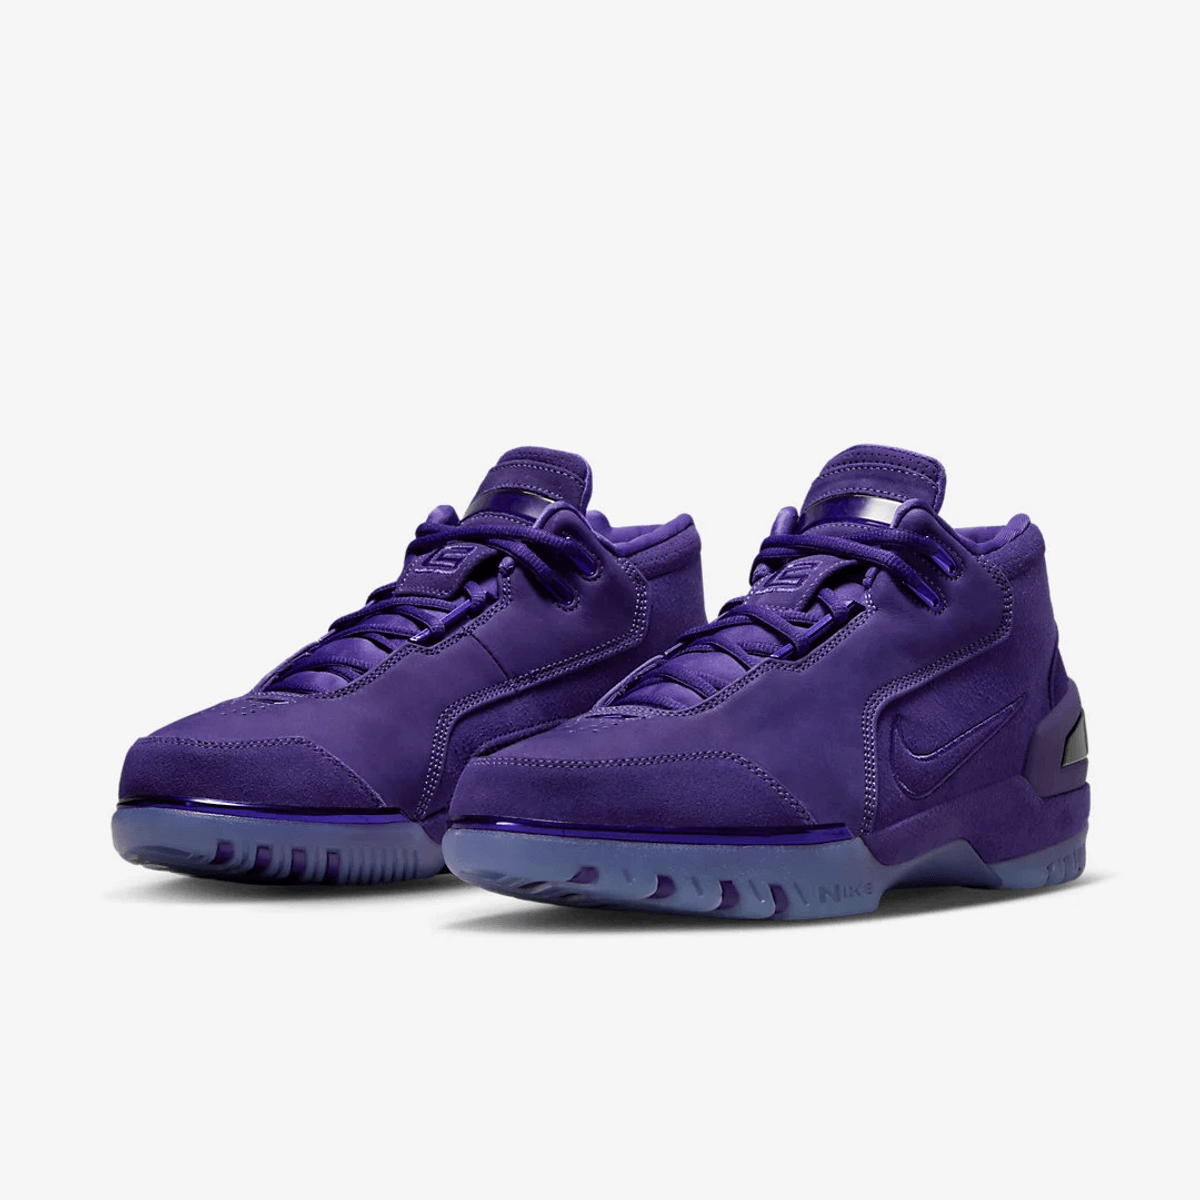 Retro Meets Luxury In the Nike Air Zoom Generation Court Purple